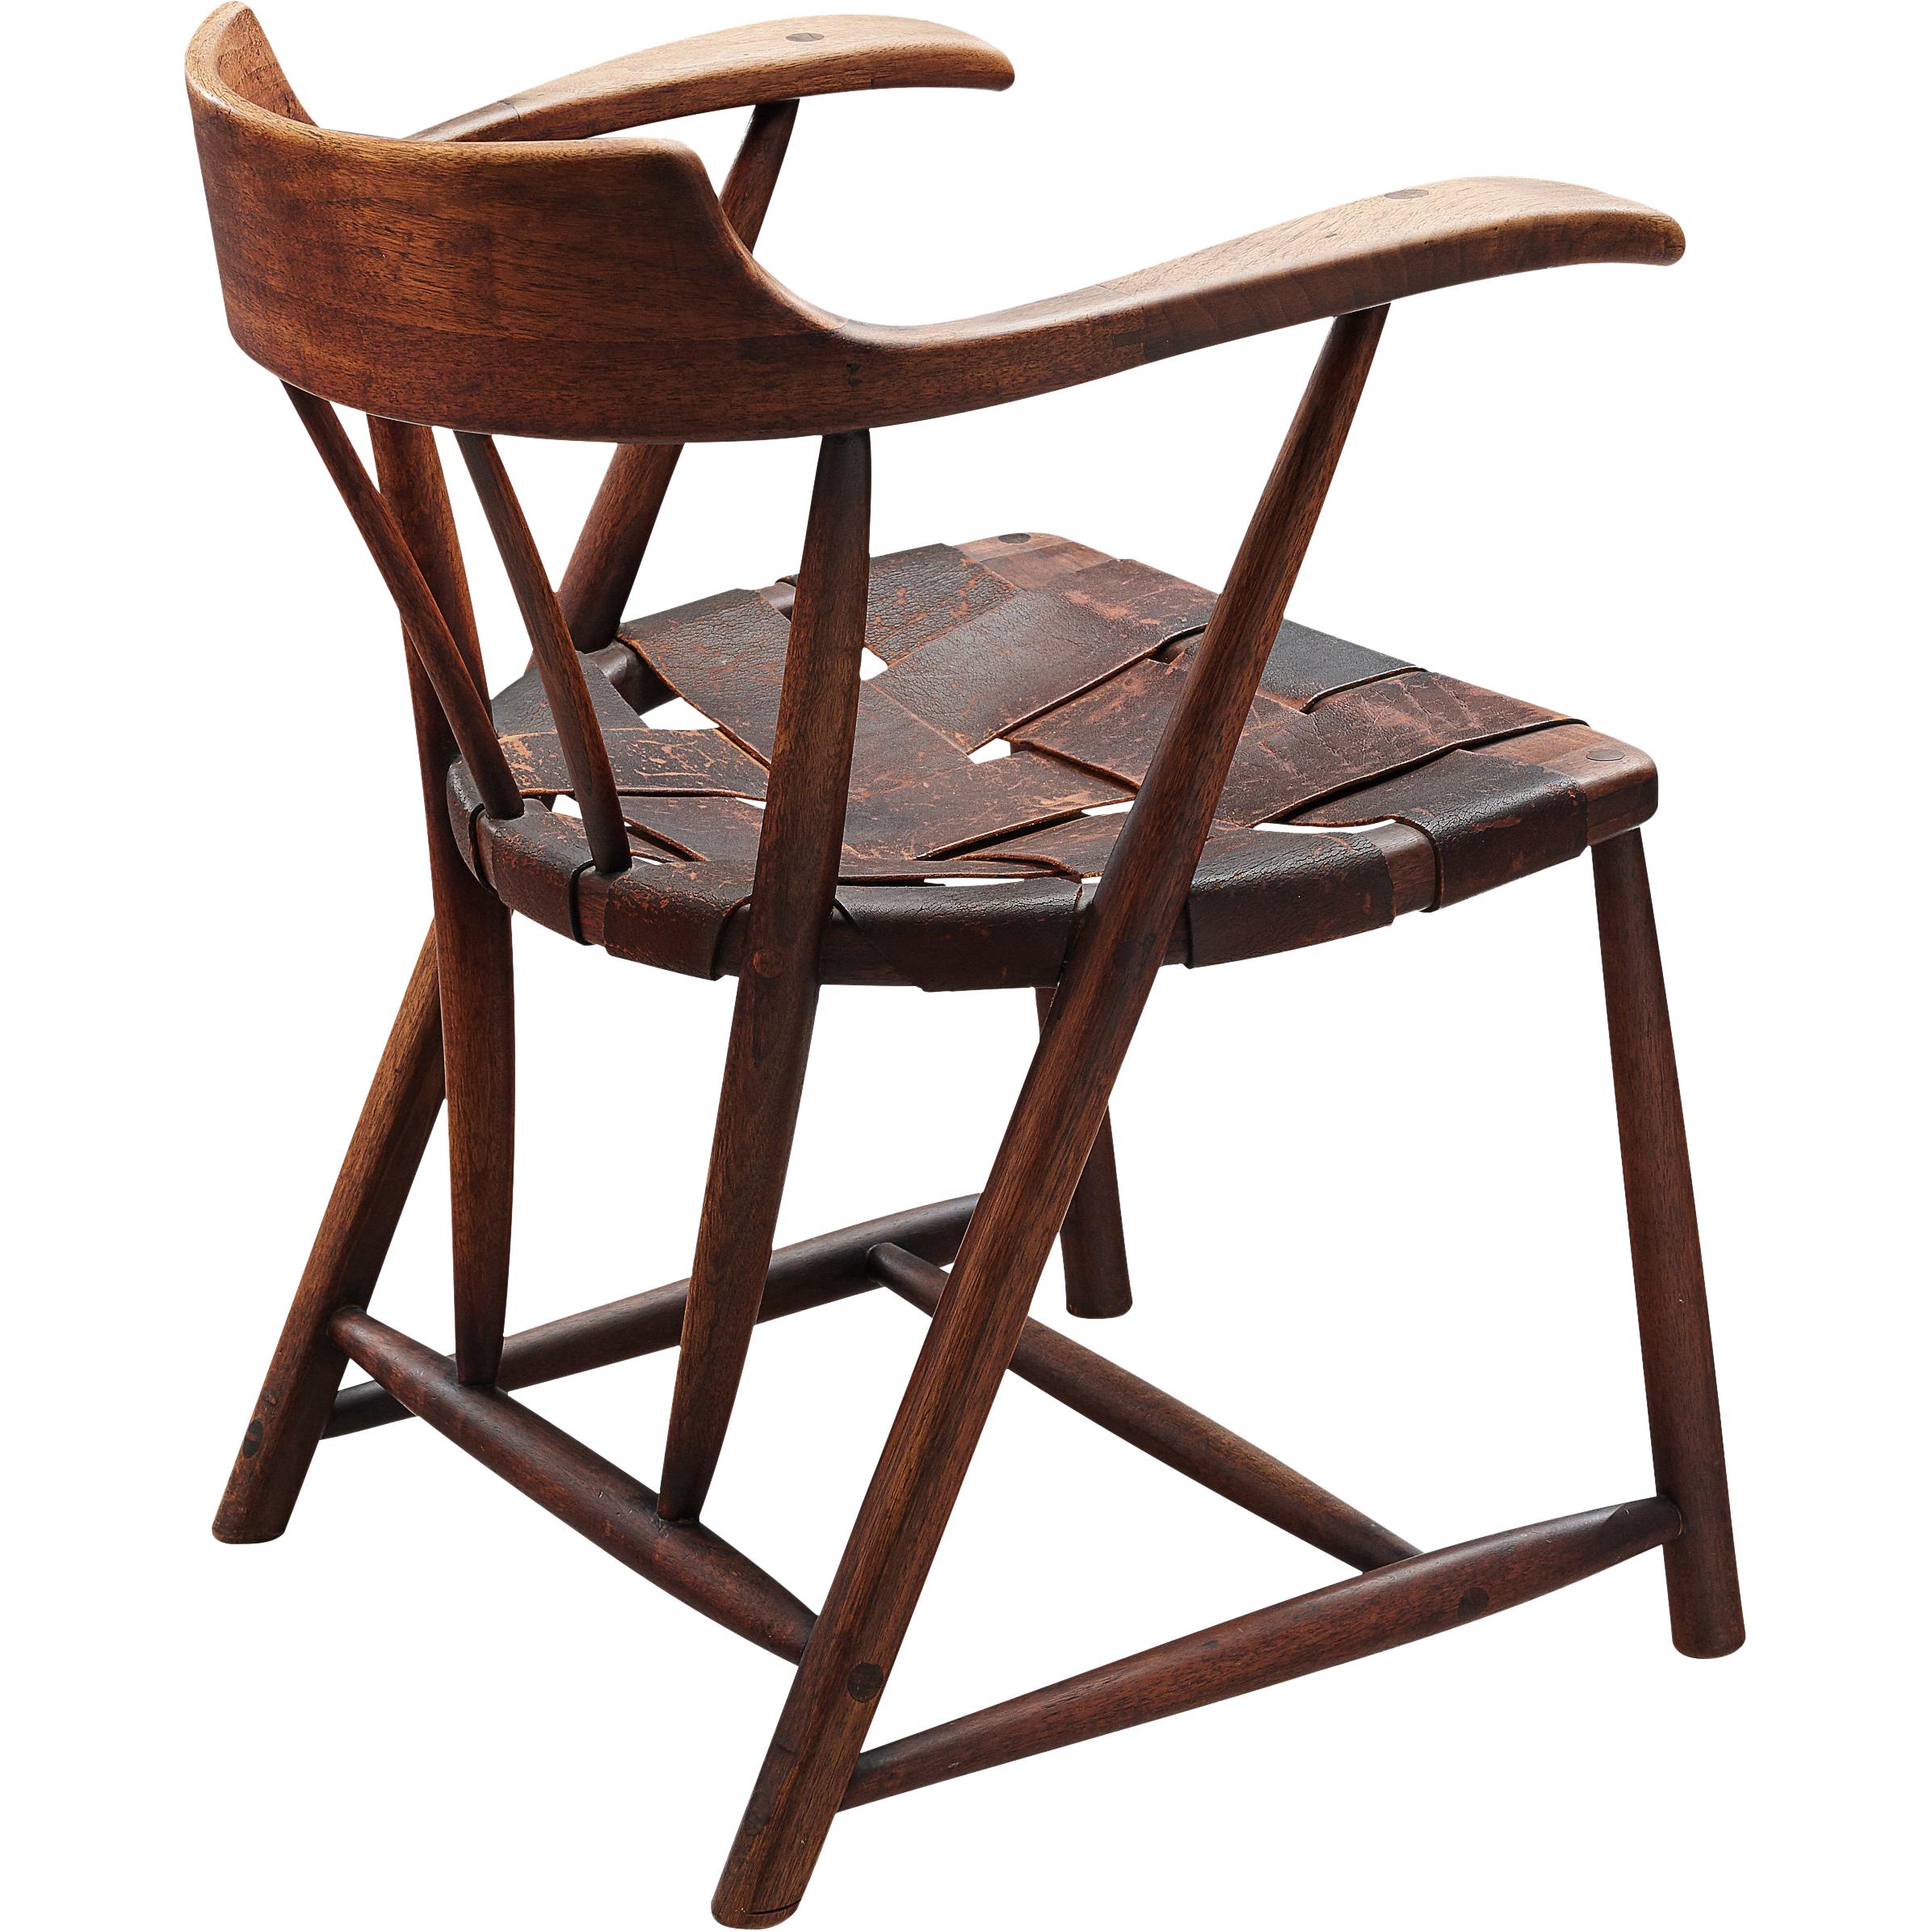 Early Wharton Esherick ‘Captain’s Chair’ in American Walnut and Brown Leather